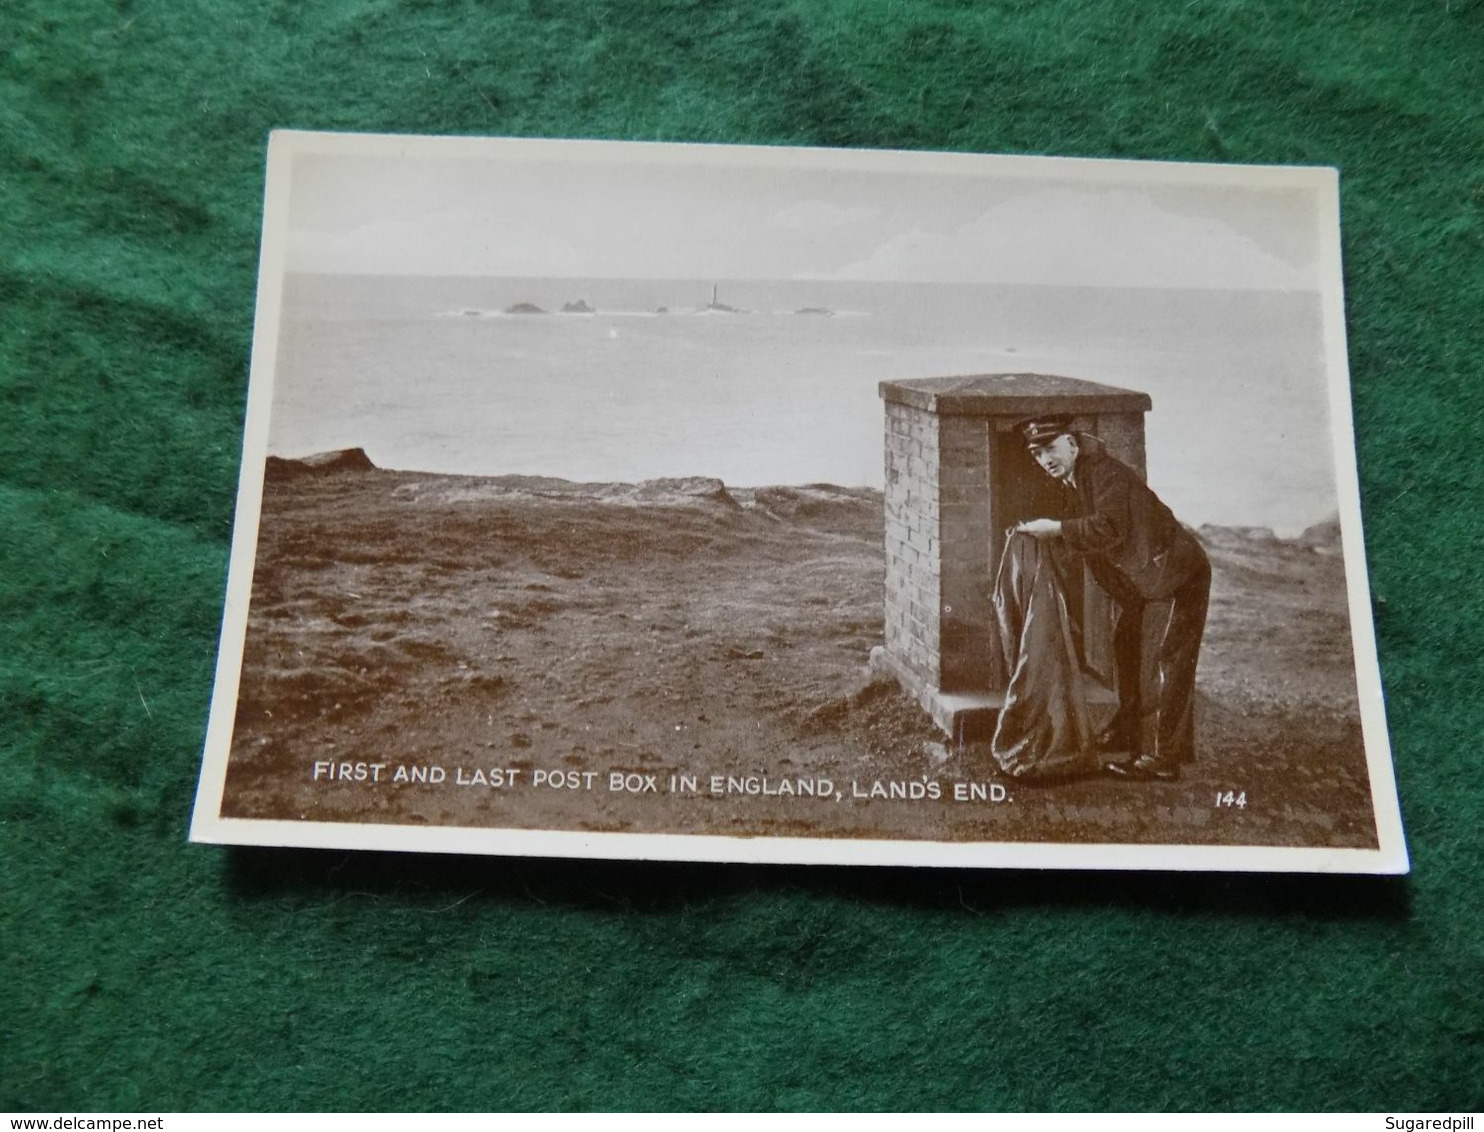 VINTAGE UK CORNWALL: LAND'S END First And Last Post Box With Postman Sepia James - Land's End